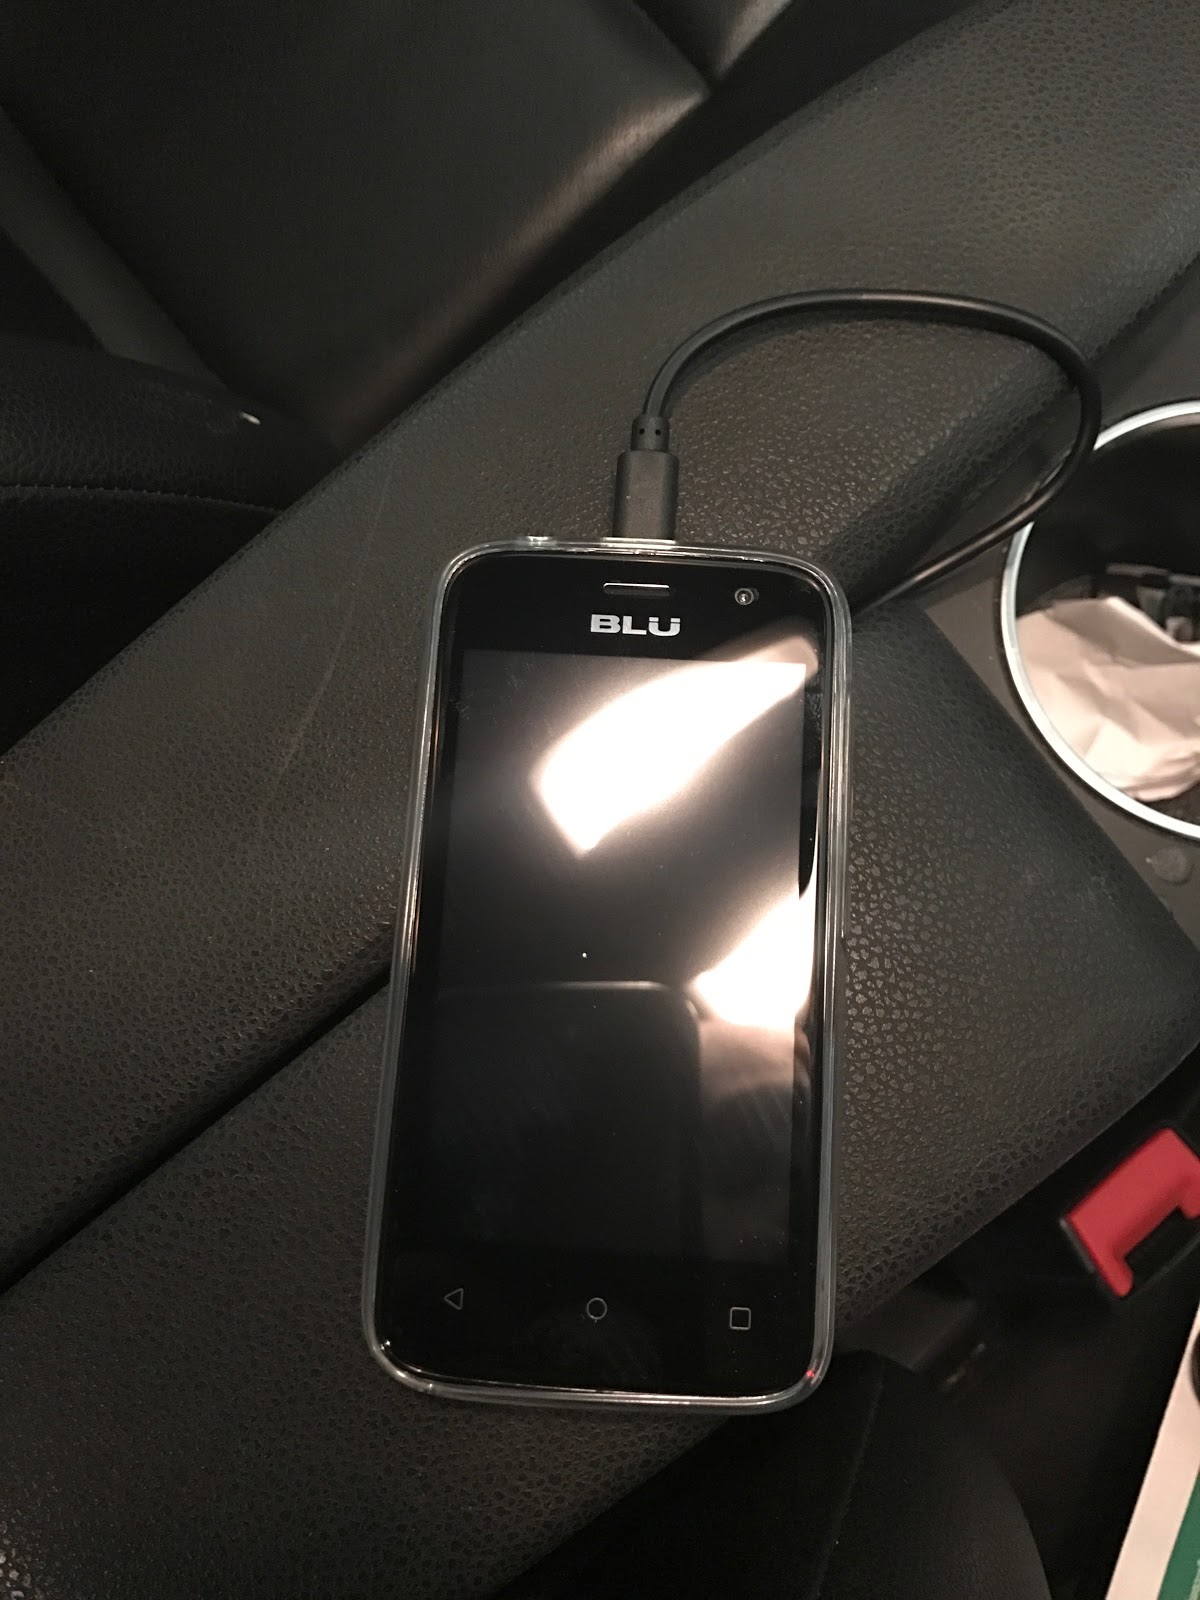 Picture of unlocked phone with Twilio SIM in car